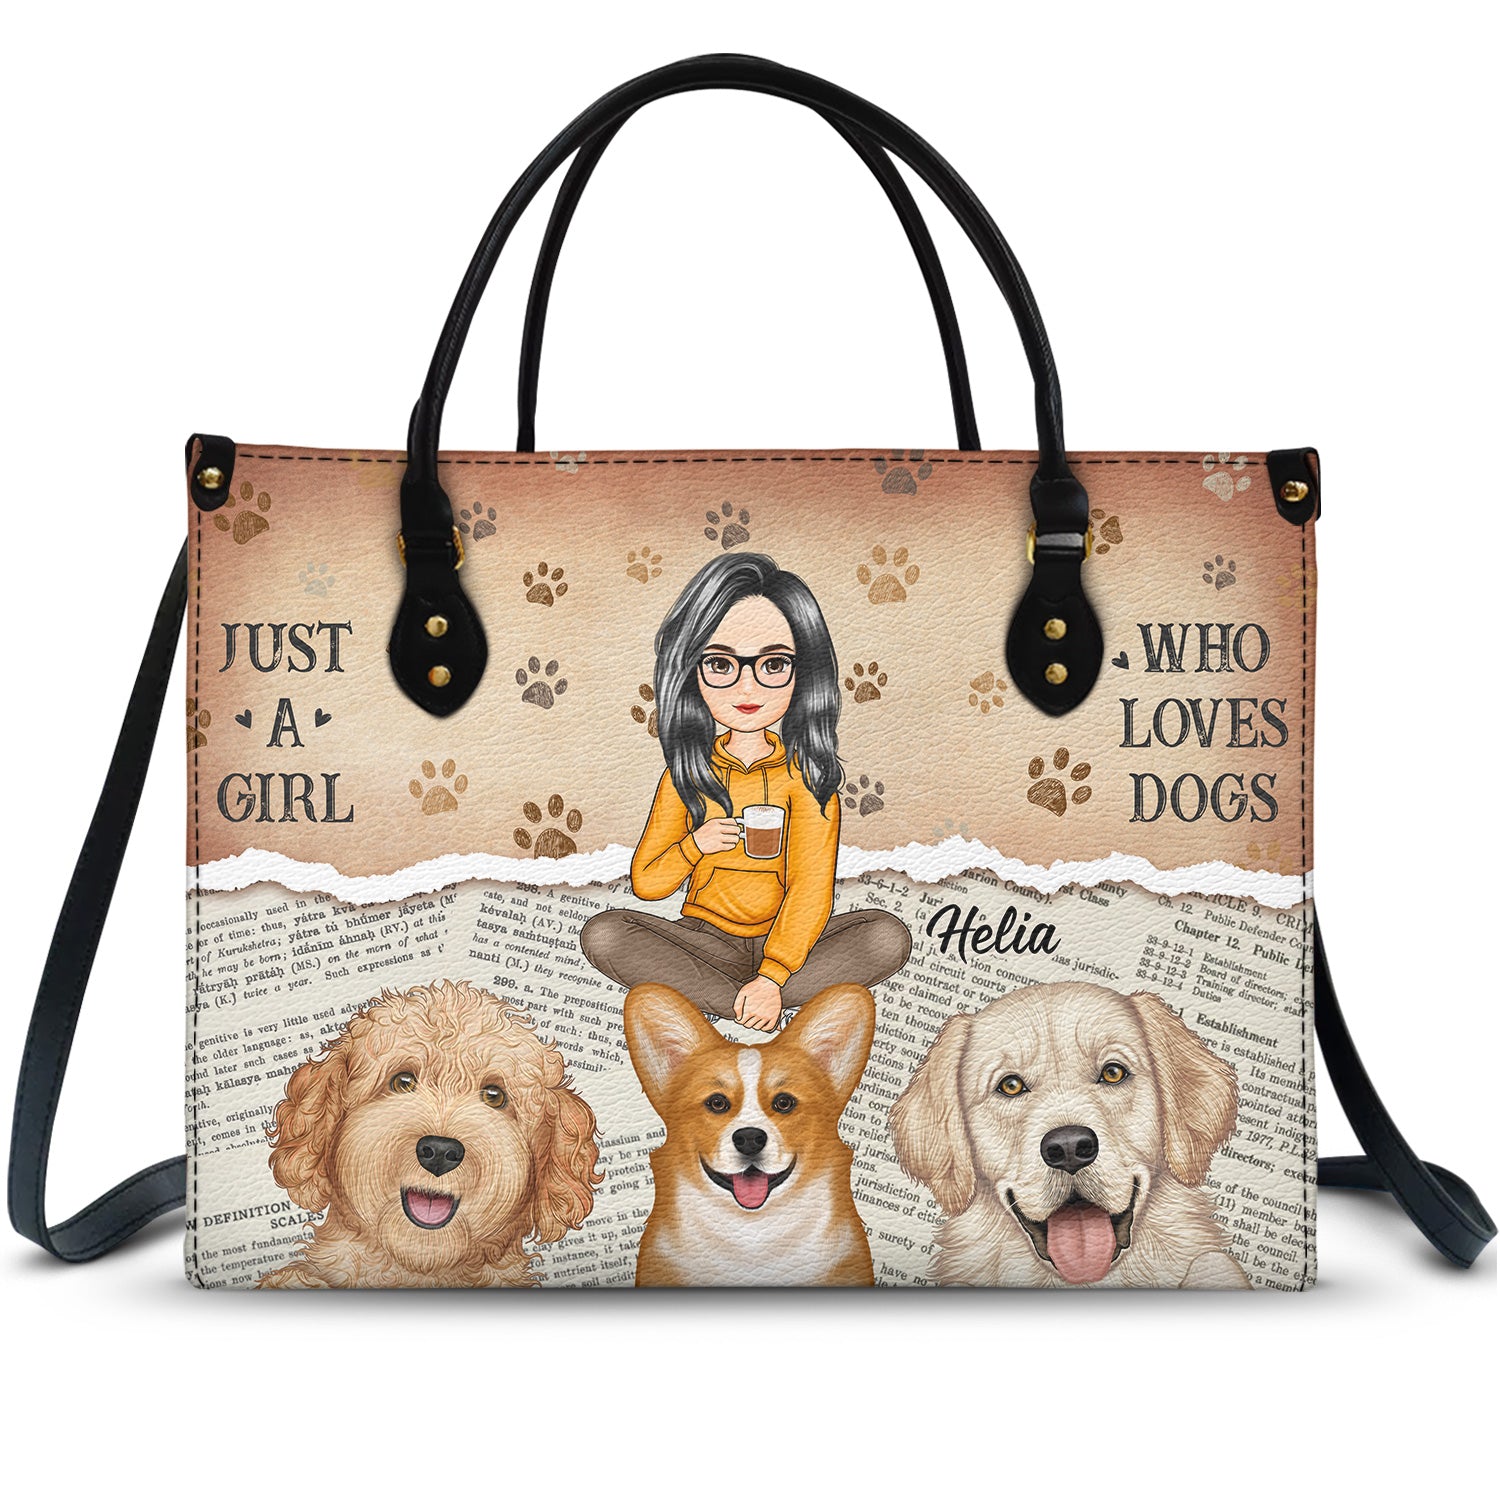 Just A Girl Who Loves Dogs - Gift For Dog Moms, Dog Lovers - Personalized Leather Bag